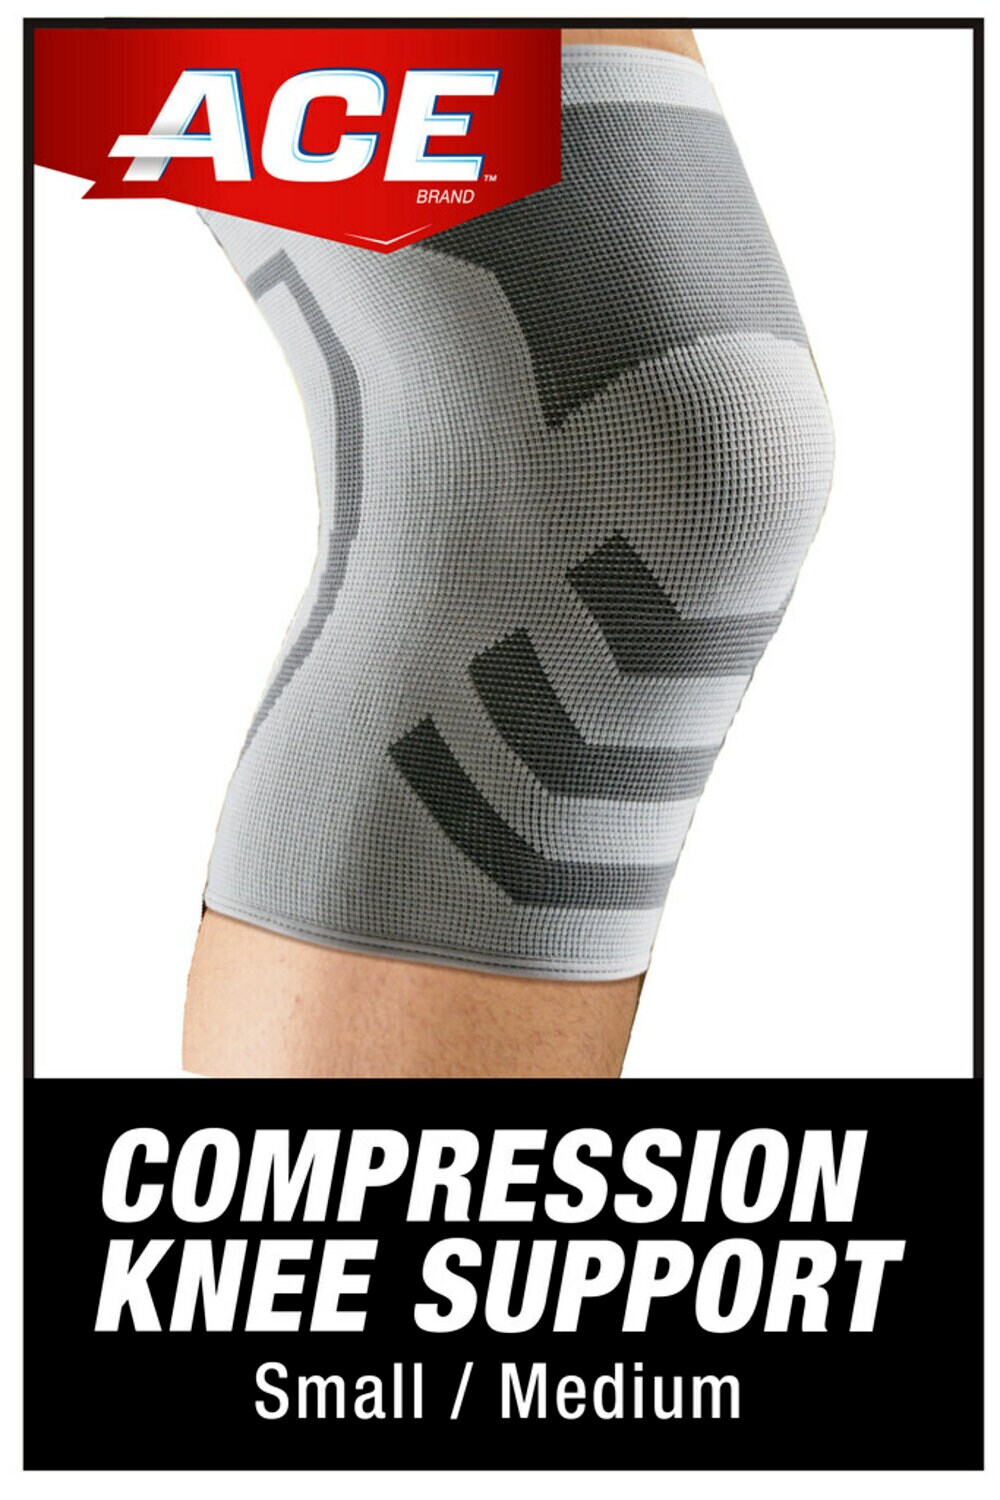 7100263406 - ACE Brand Compression Knee Support 207320, Small / Medium